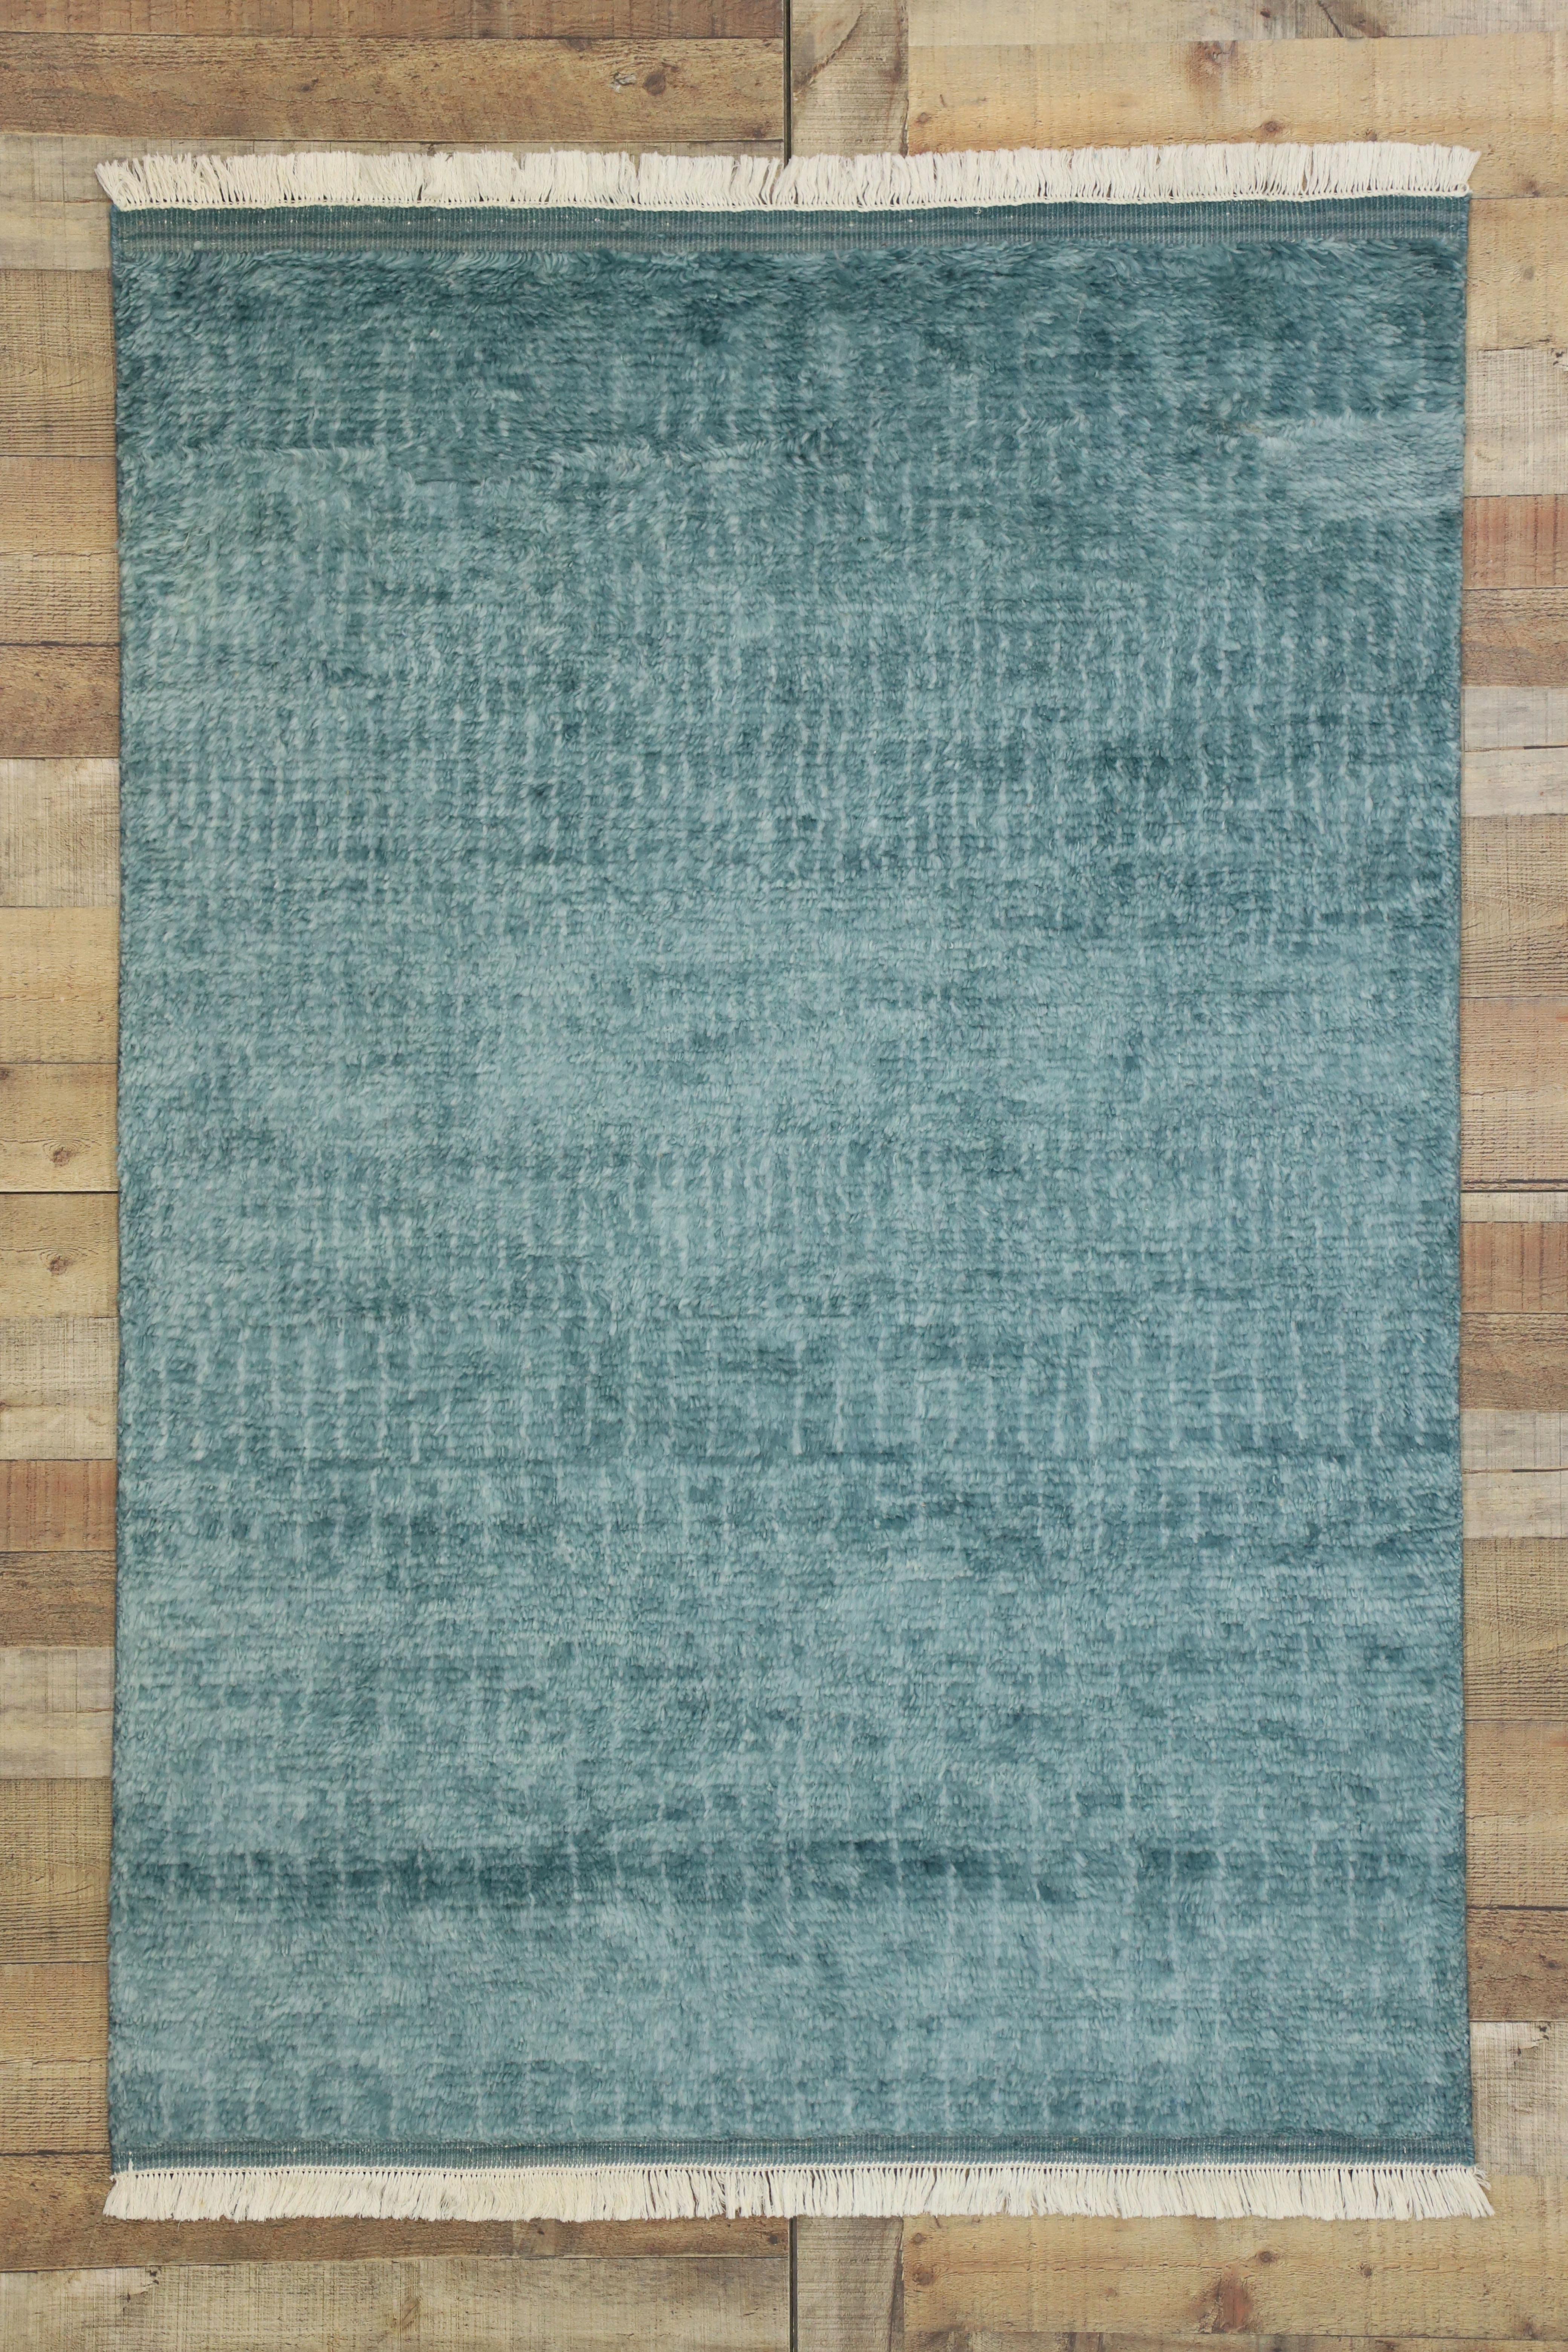 New Contemporary Beach Hygge Moroccan Accent Rug with Modern Cape Cod Style 1